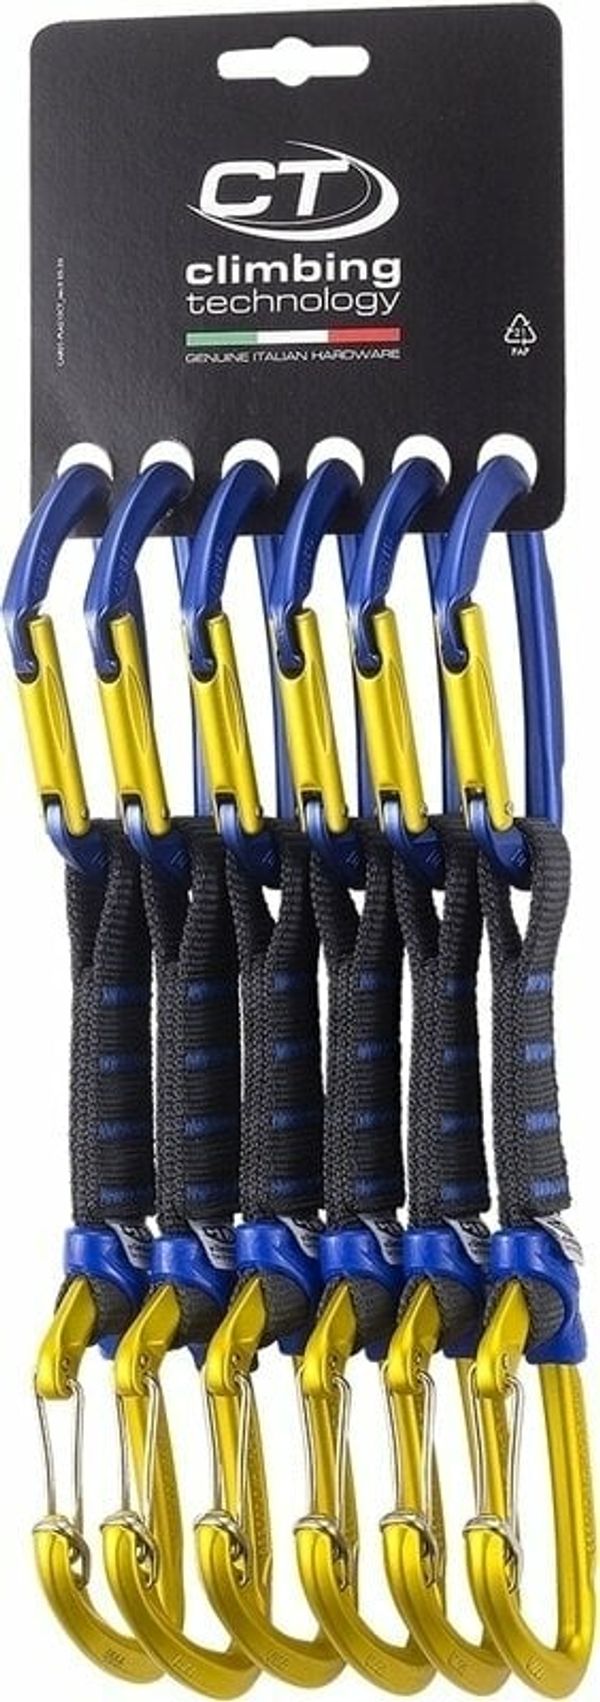 Climbing Technology Climbing Technology Berry Set NY Pro Pack of 6 Quickdraws Blue/Gold 12 cm